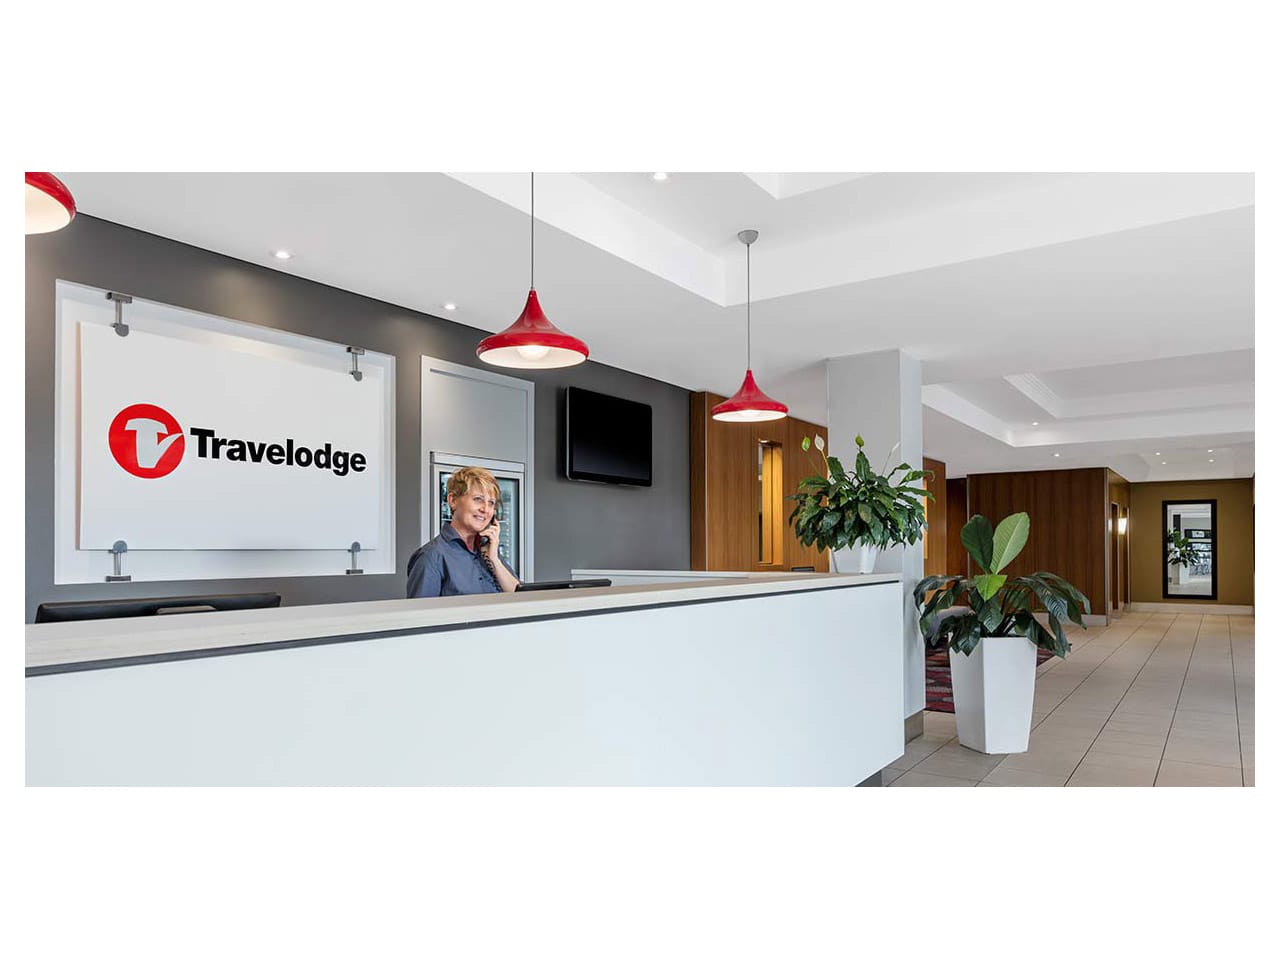 Travelodge reception area with lady on phone